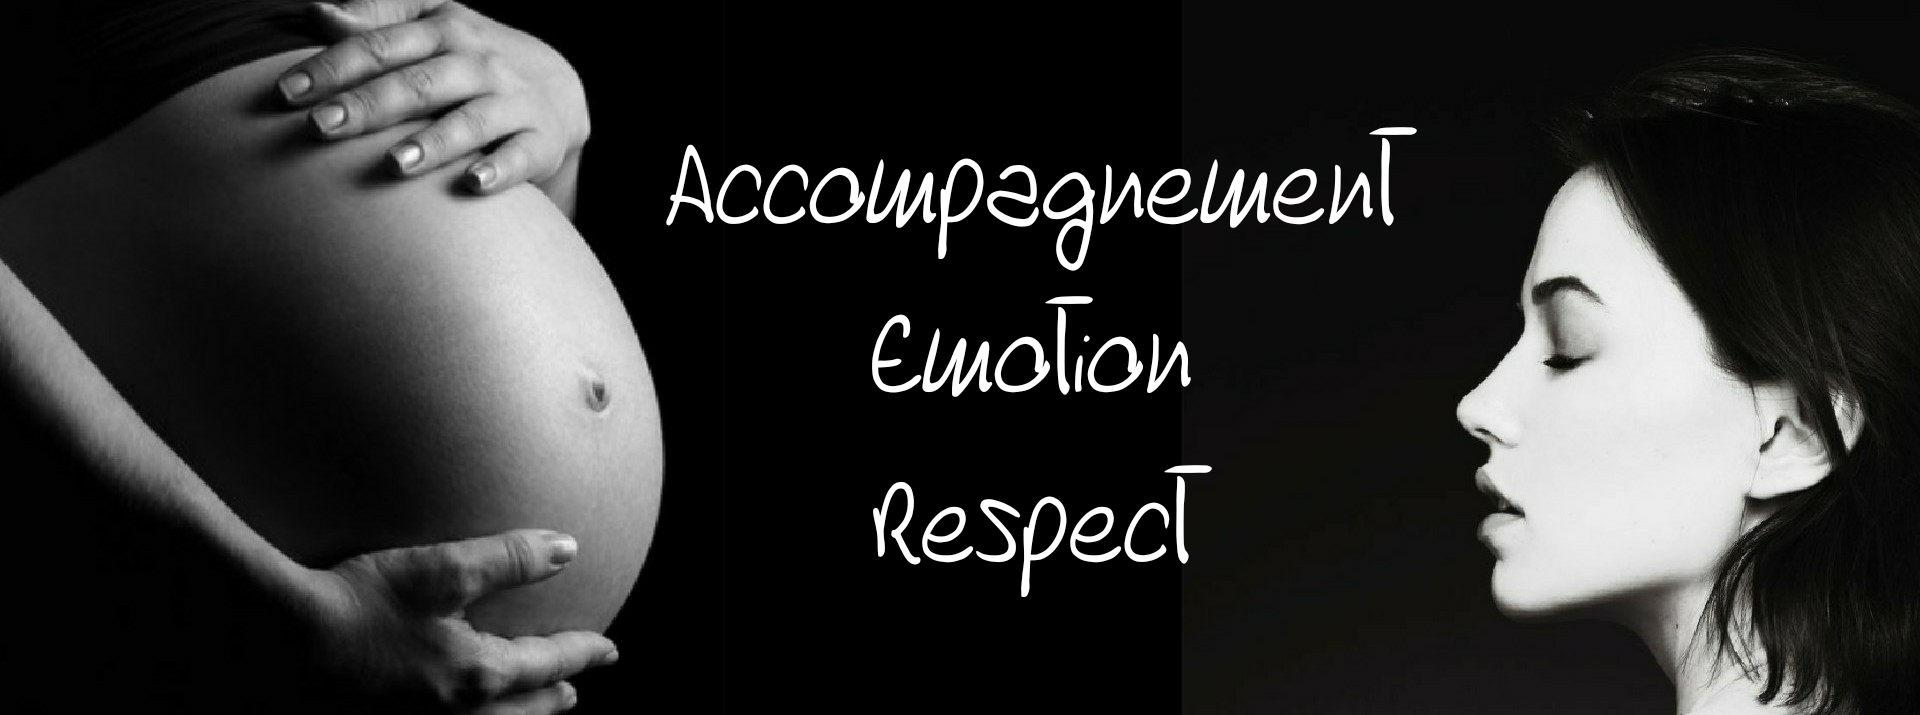 accompagnement-emotion-respect